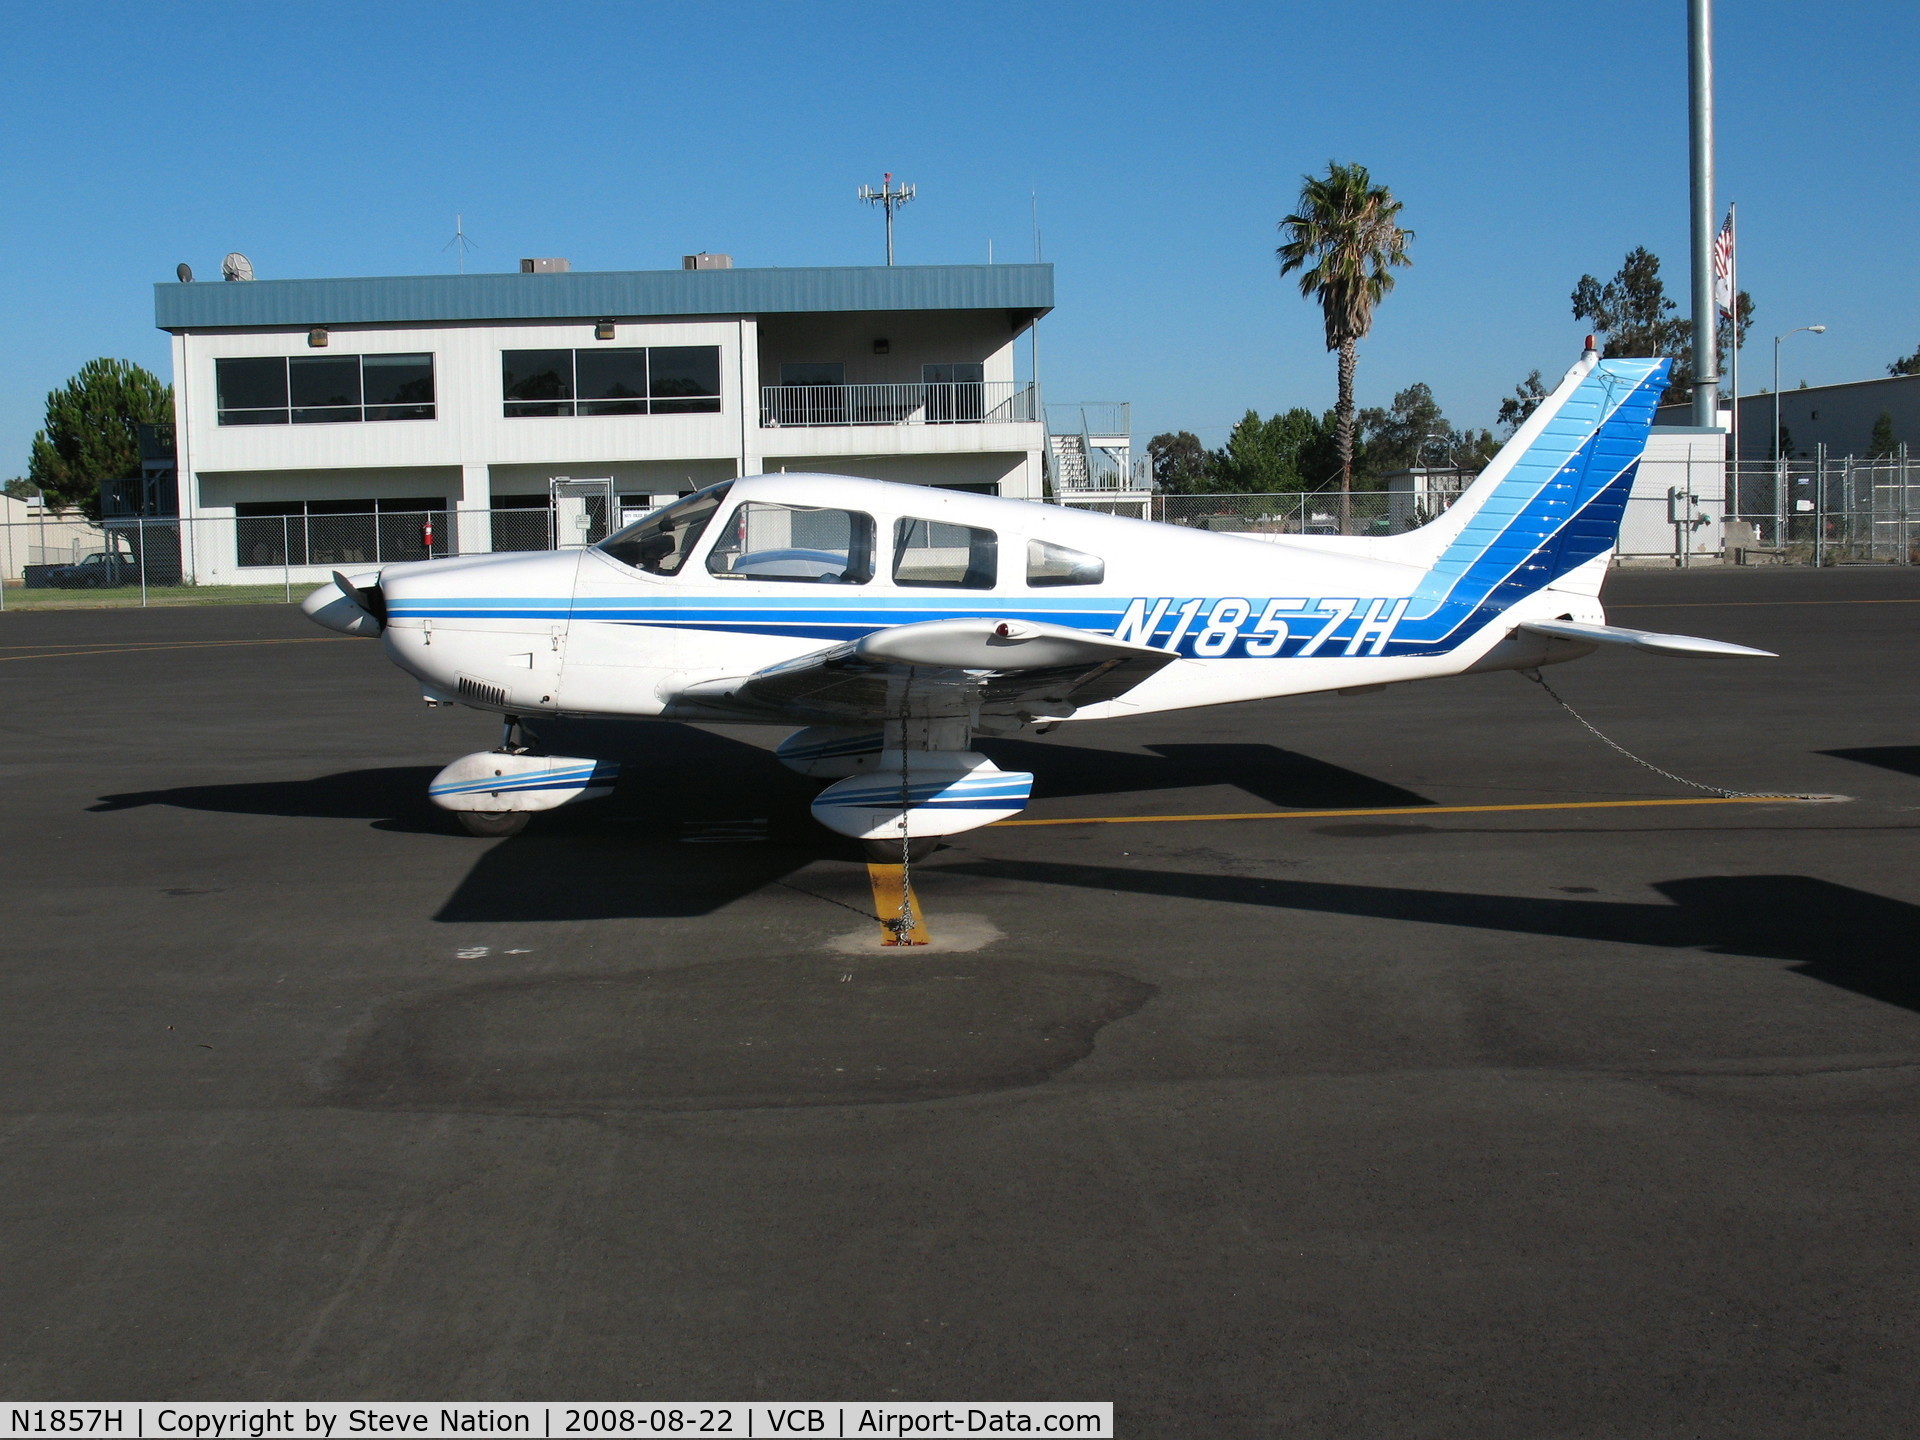 N1857H, 1977 Piper PA-28-181 C/N 28-7790348, 1977 Piper PA-28-181 @ Nut Tree Airport (Vacaville), CA